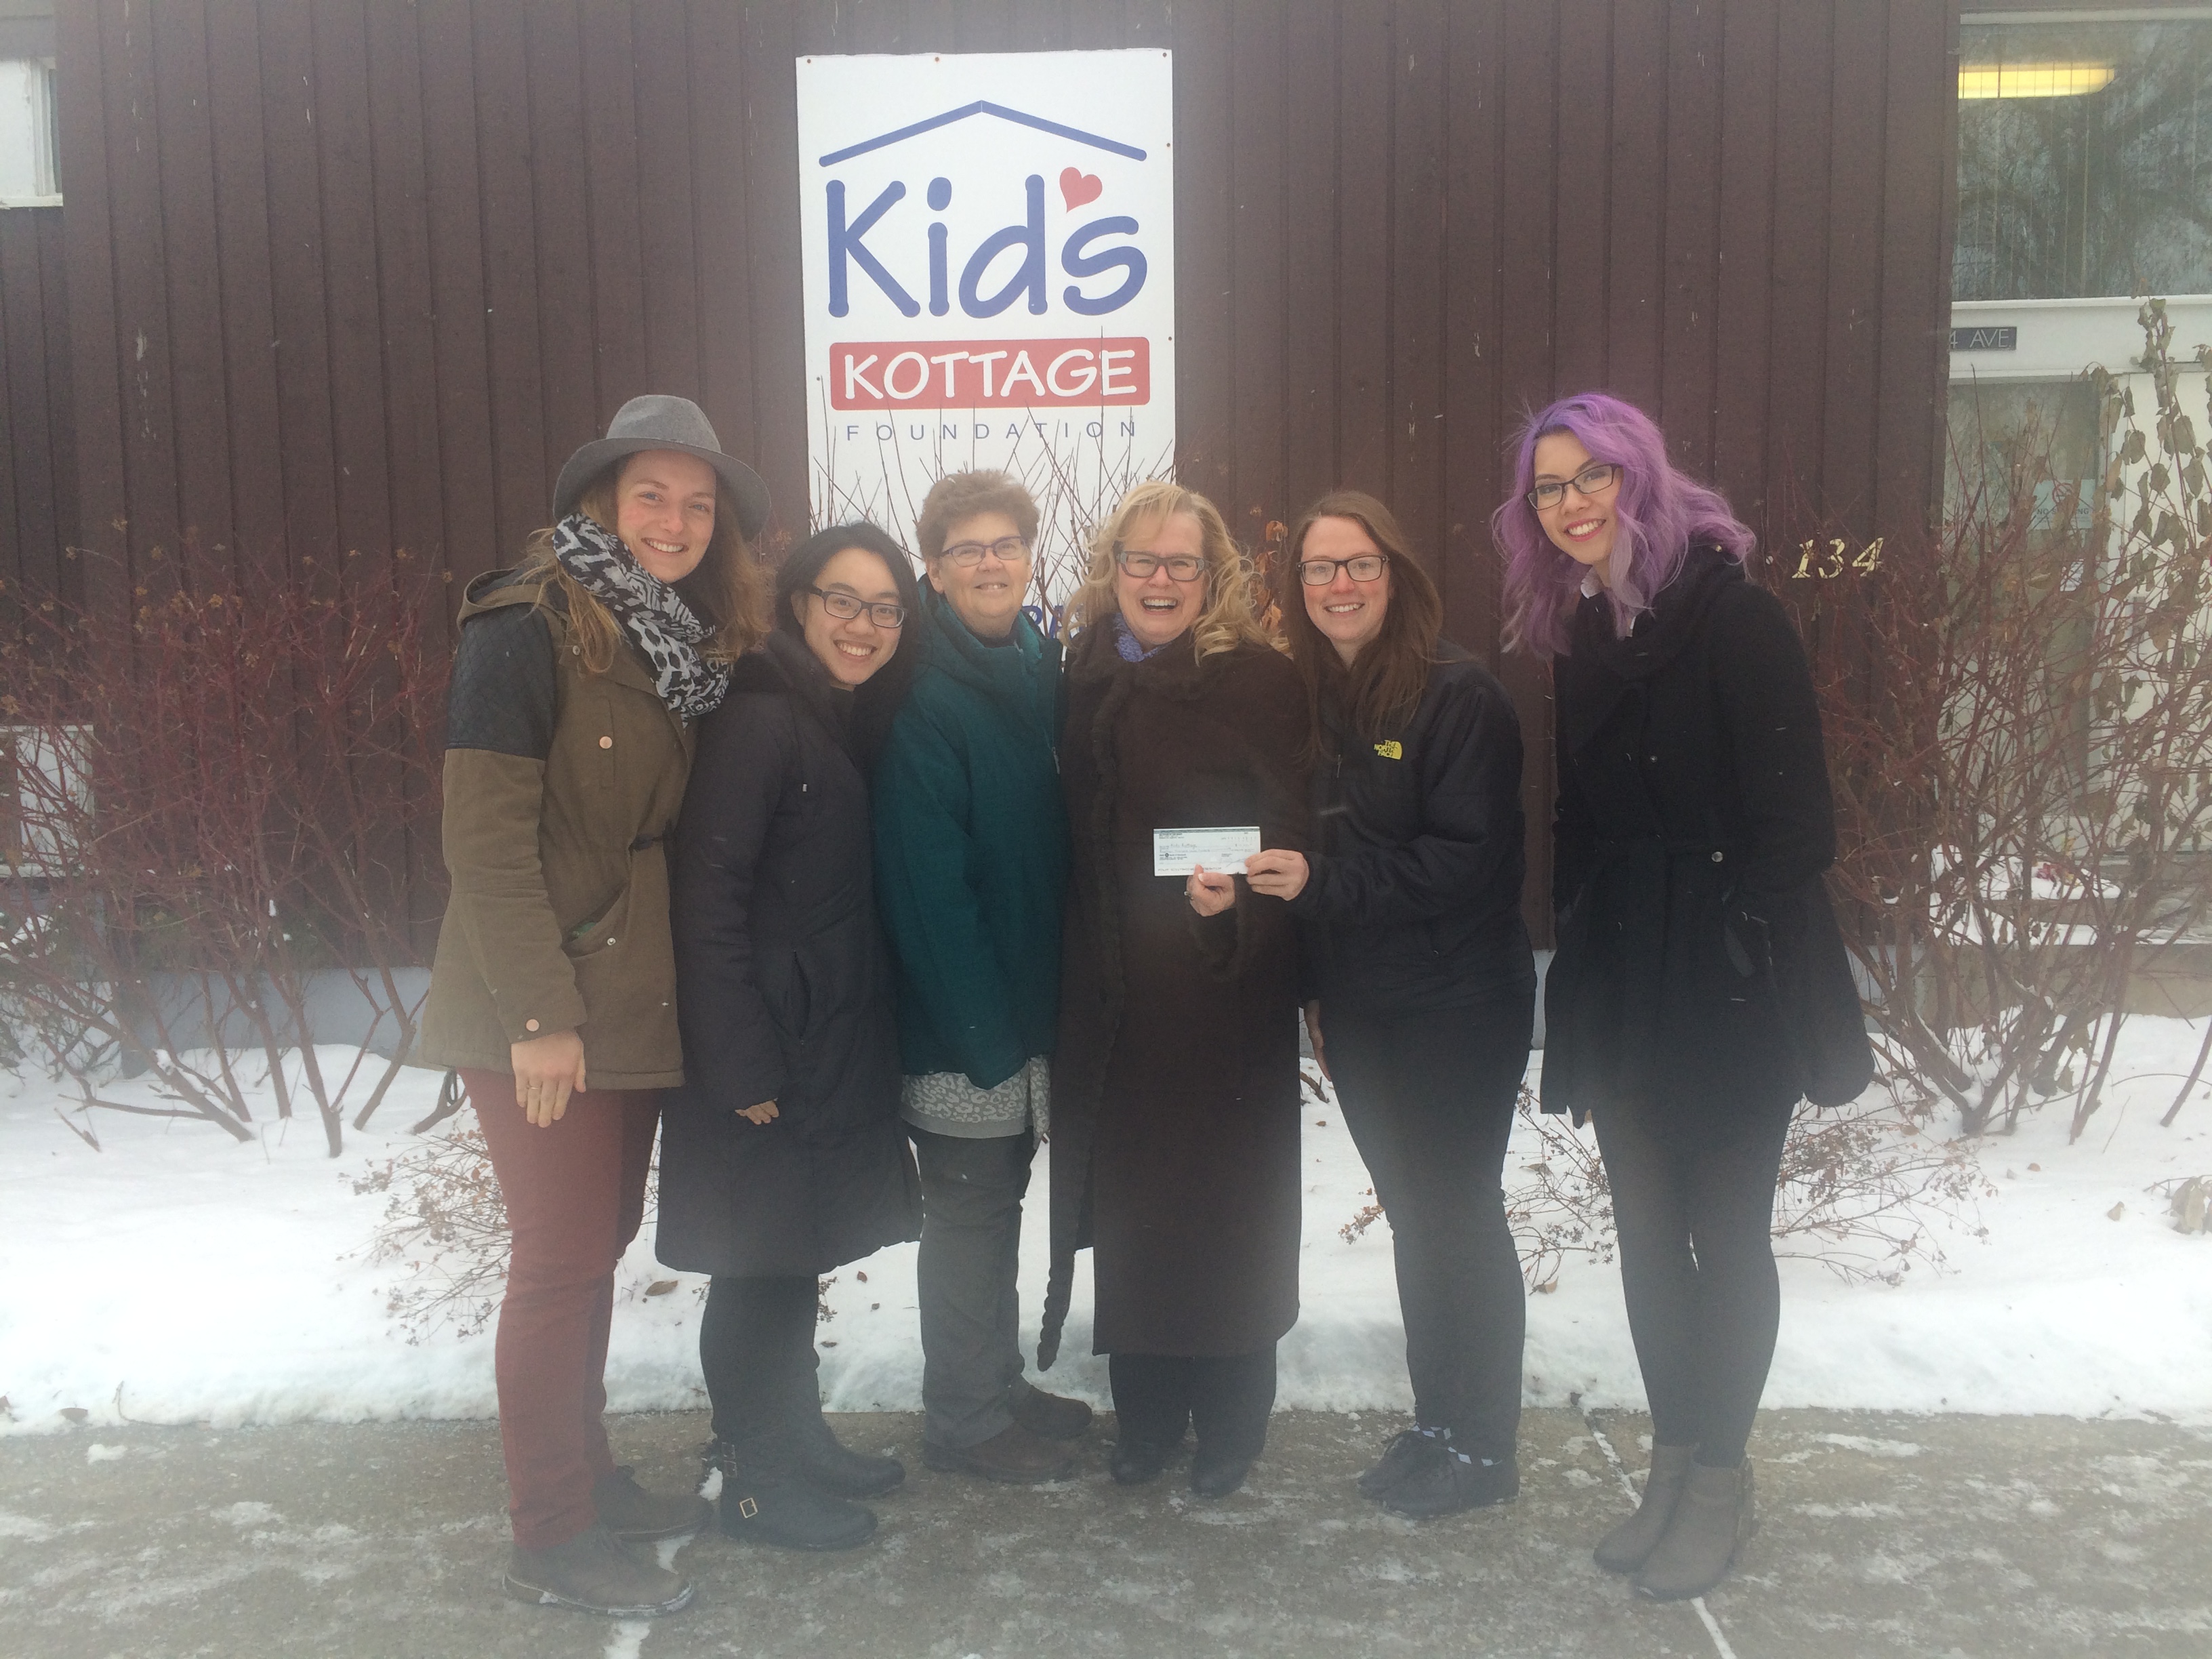 The Affair of the Heart Executive committee presents Kids Kottage Foundation with a cheque.